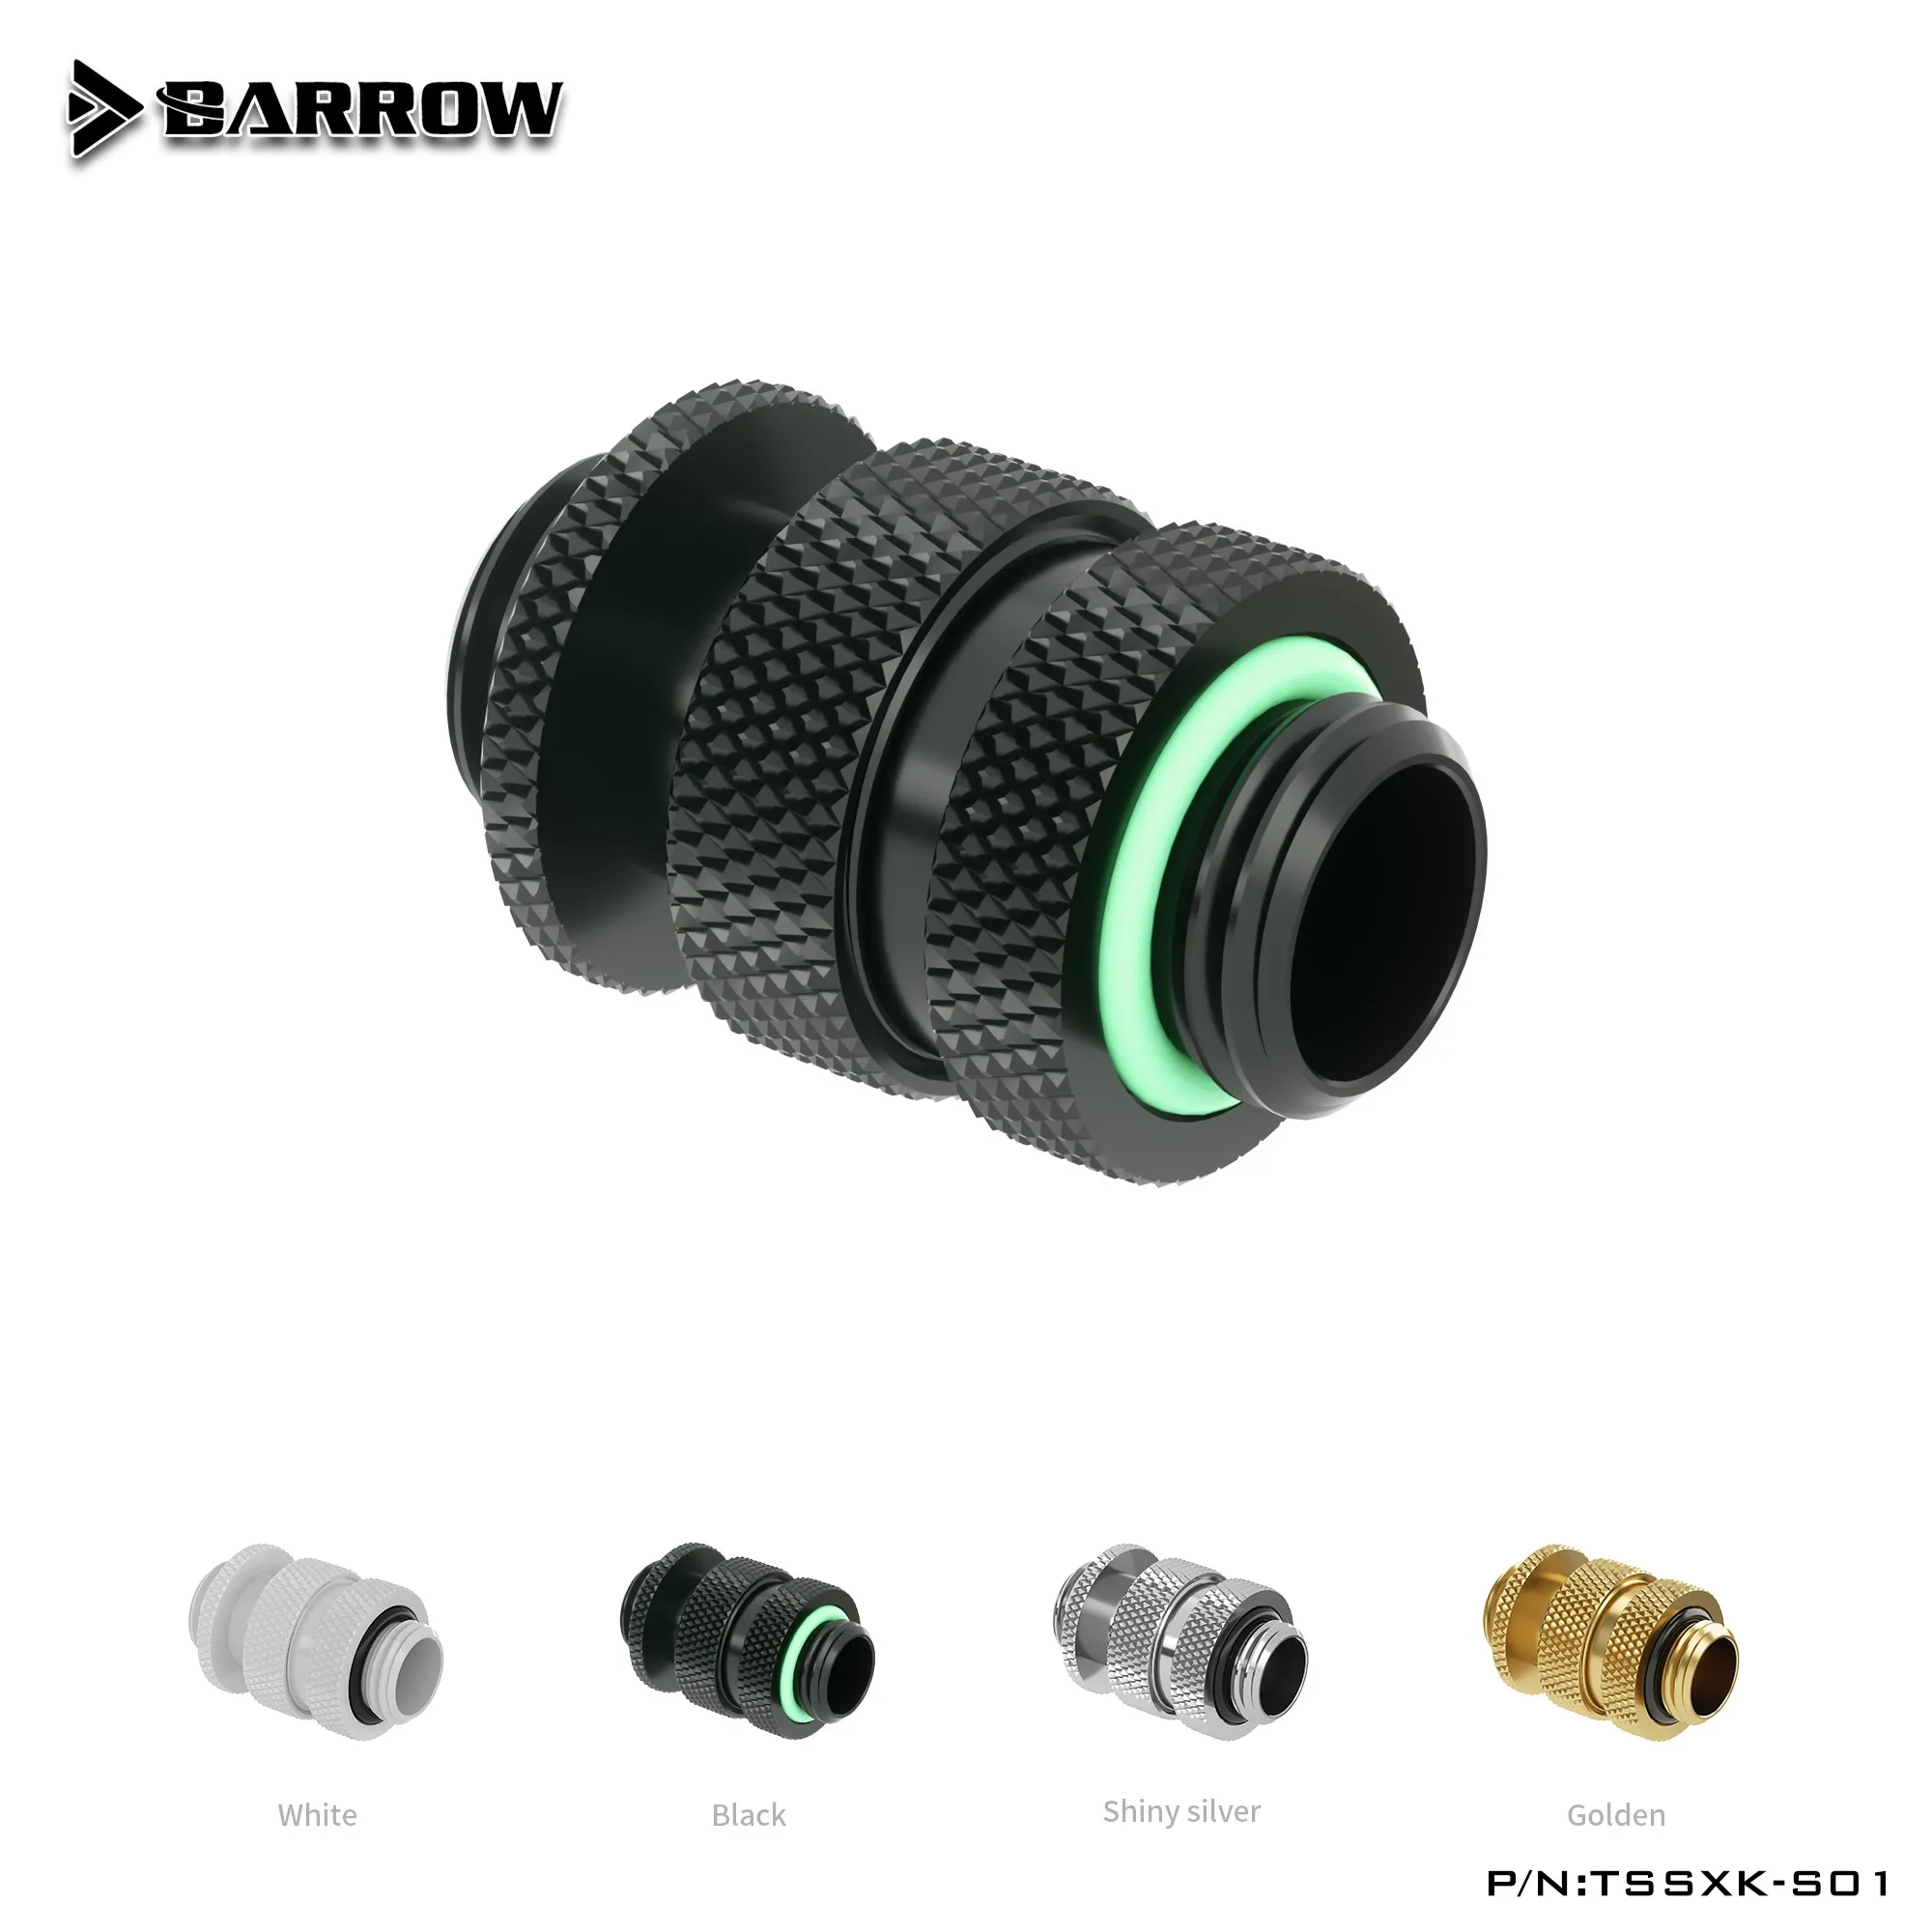 

Barrow 16-22MM water-cooled male-to-male rotary extension connector extender modification TSSXK-S01